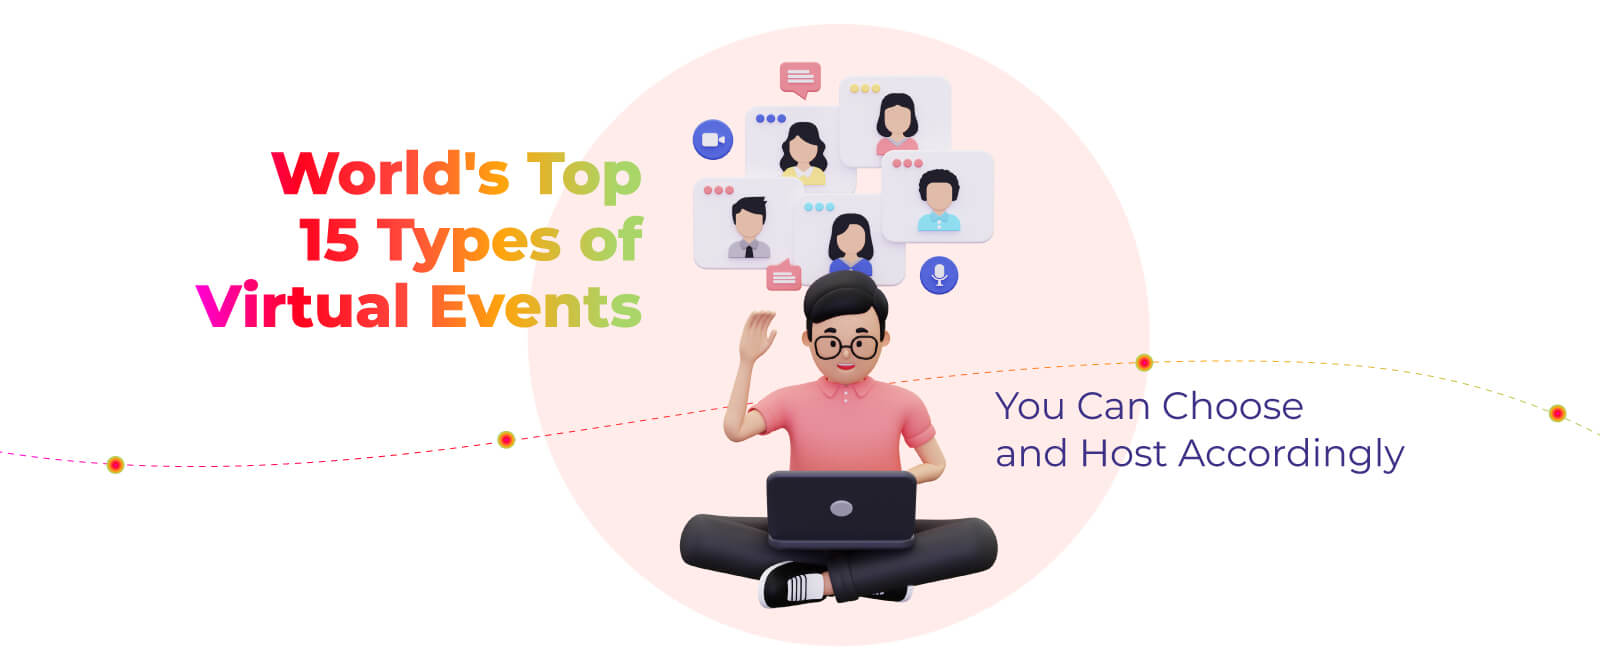 World’s Top 15 Types of Virtual Events: You Can Choose and Host Accordingly